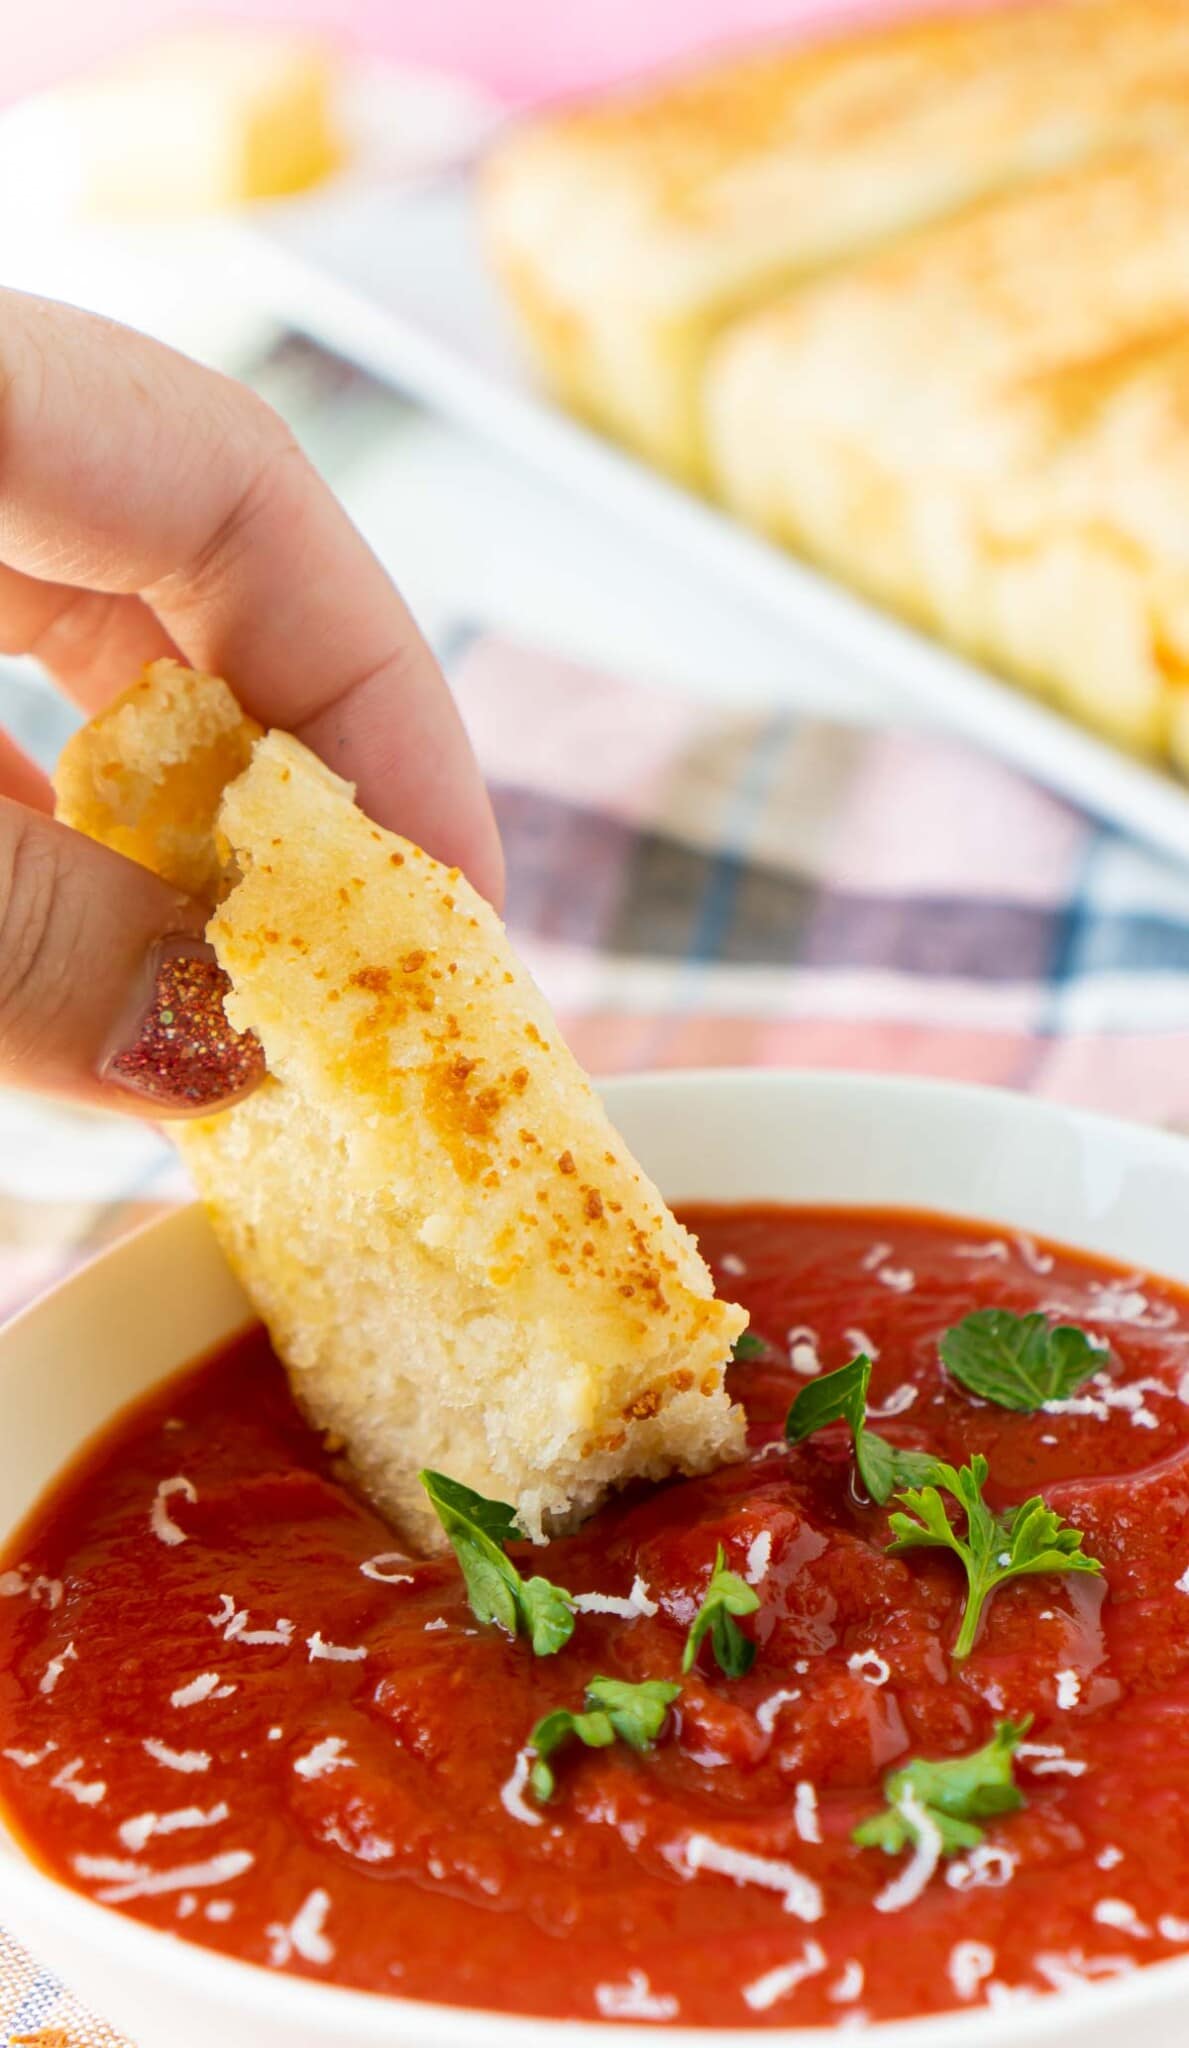 Woman's hand dipping a garlic breadstick into a bowl of red marinara sauce